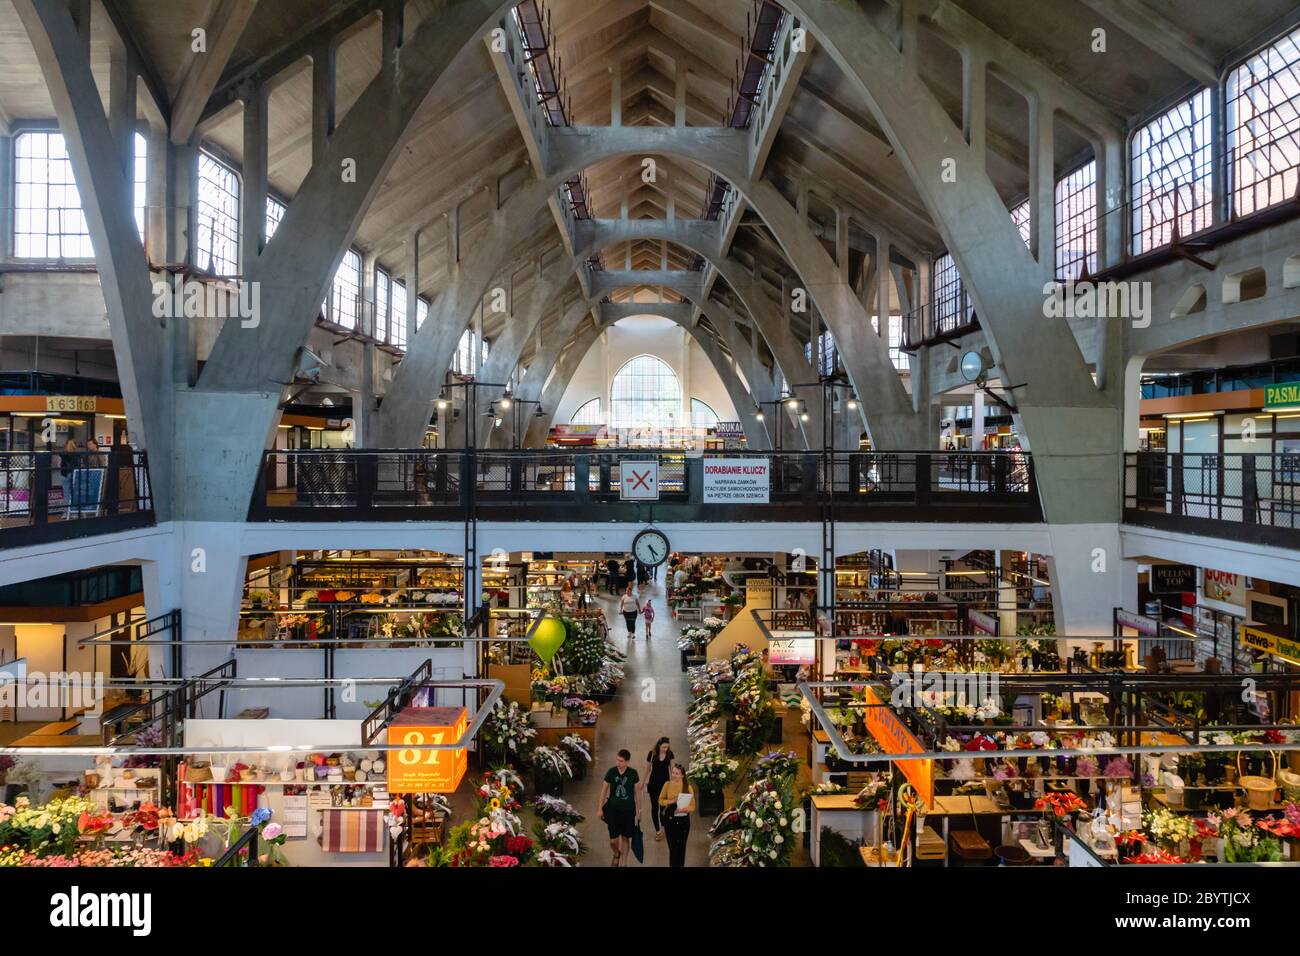 Wroclaw, Poland - August 2019: Wroclaw Market Hall architecture shope - indoor food market located in city center of Wroclaw, near Piaskowa Pier. Stock Photo